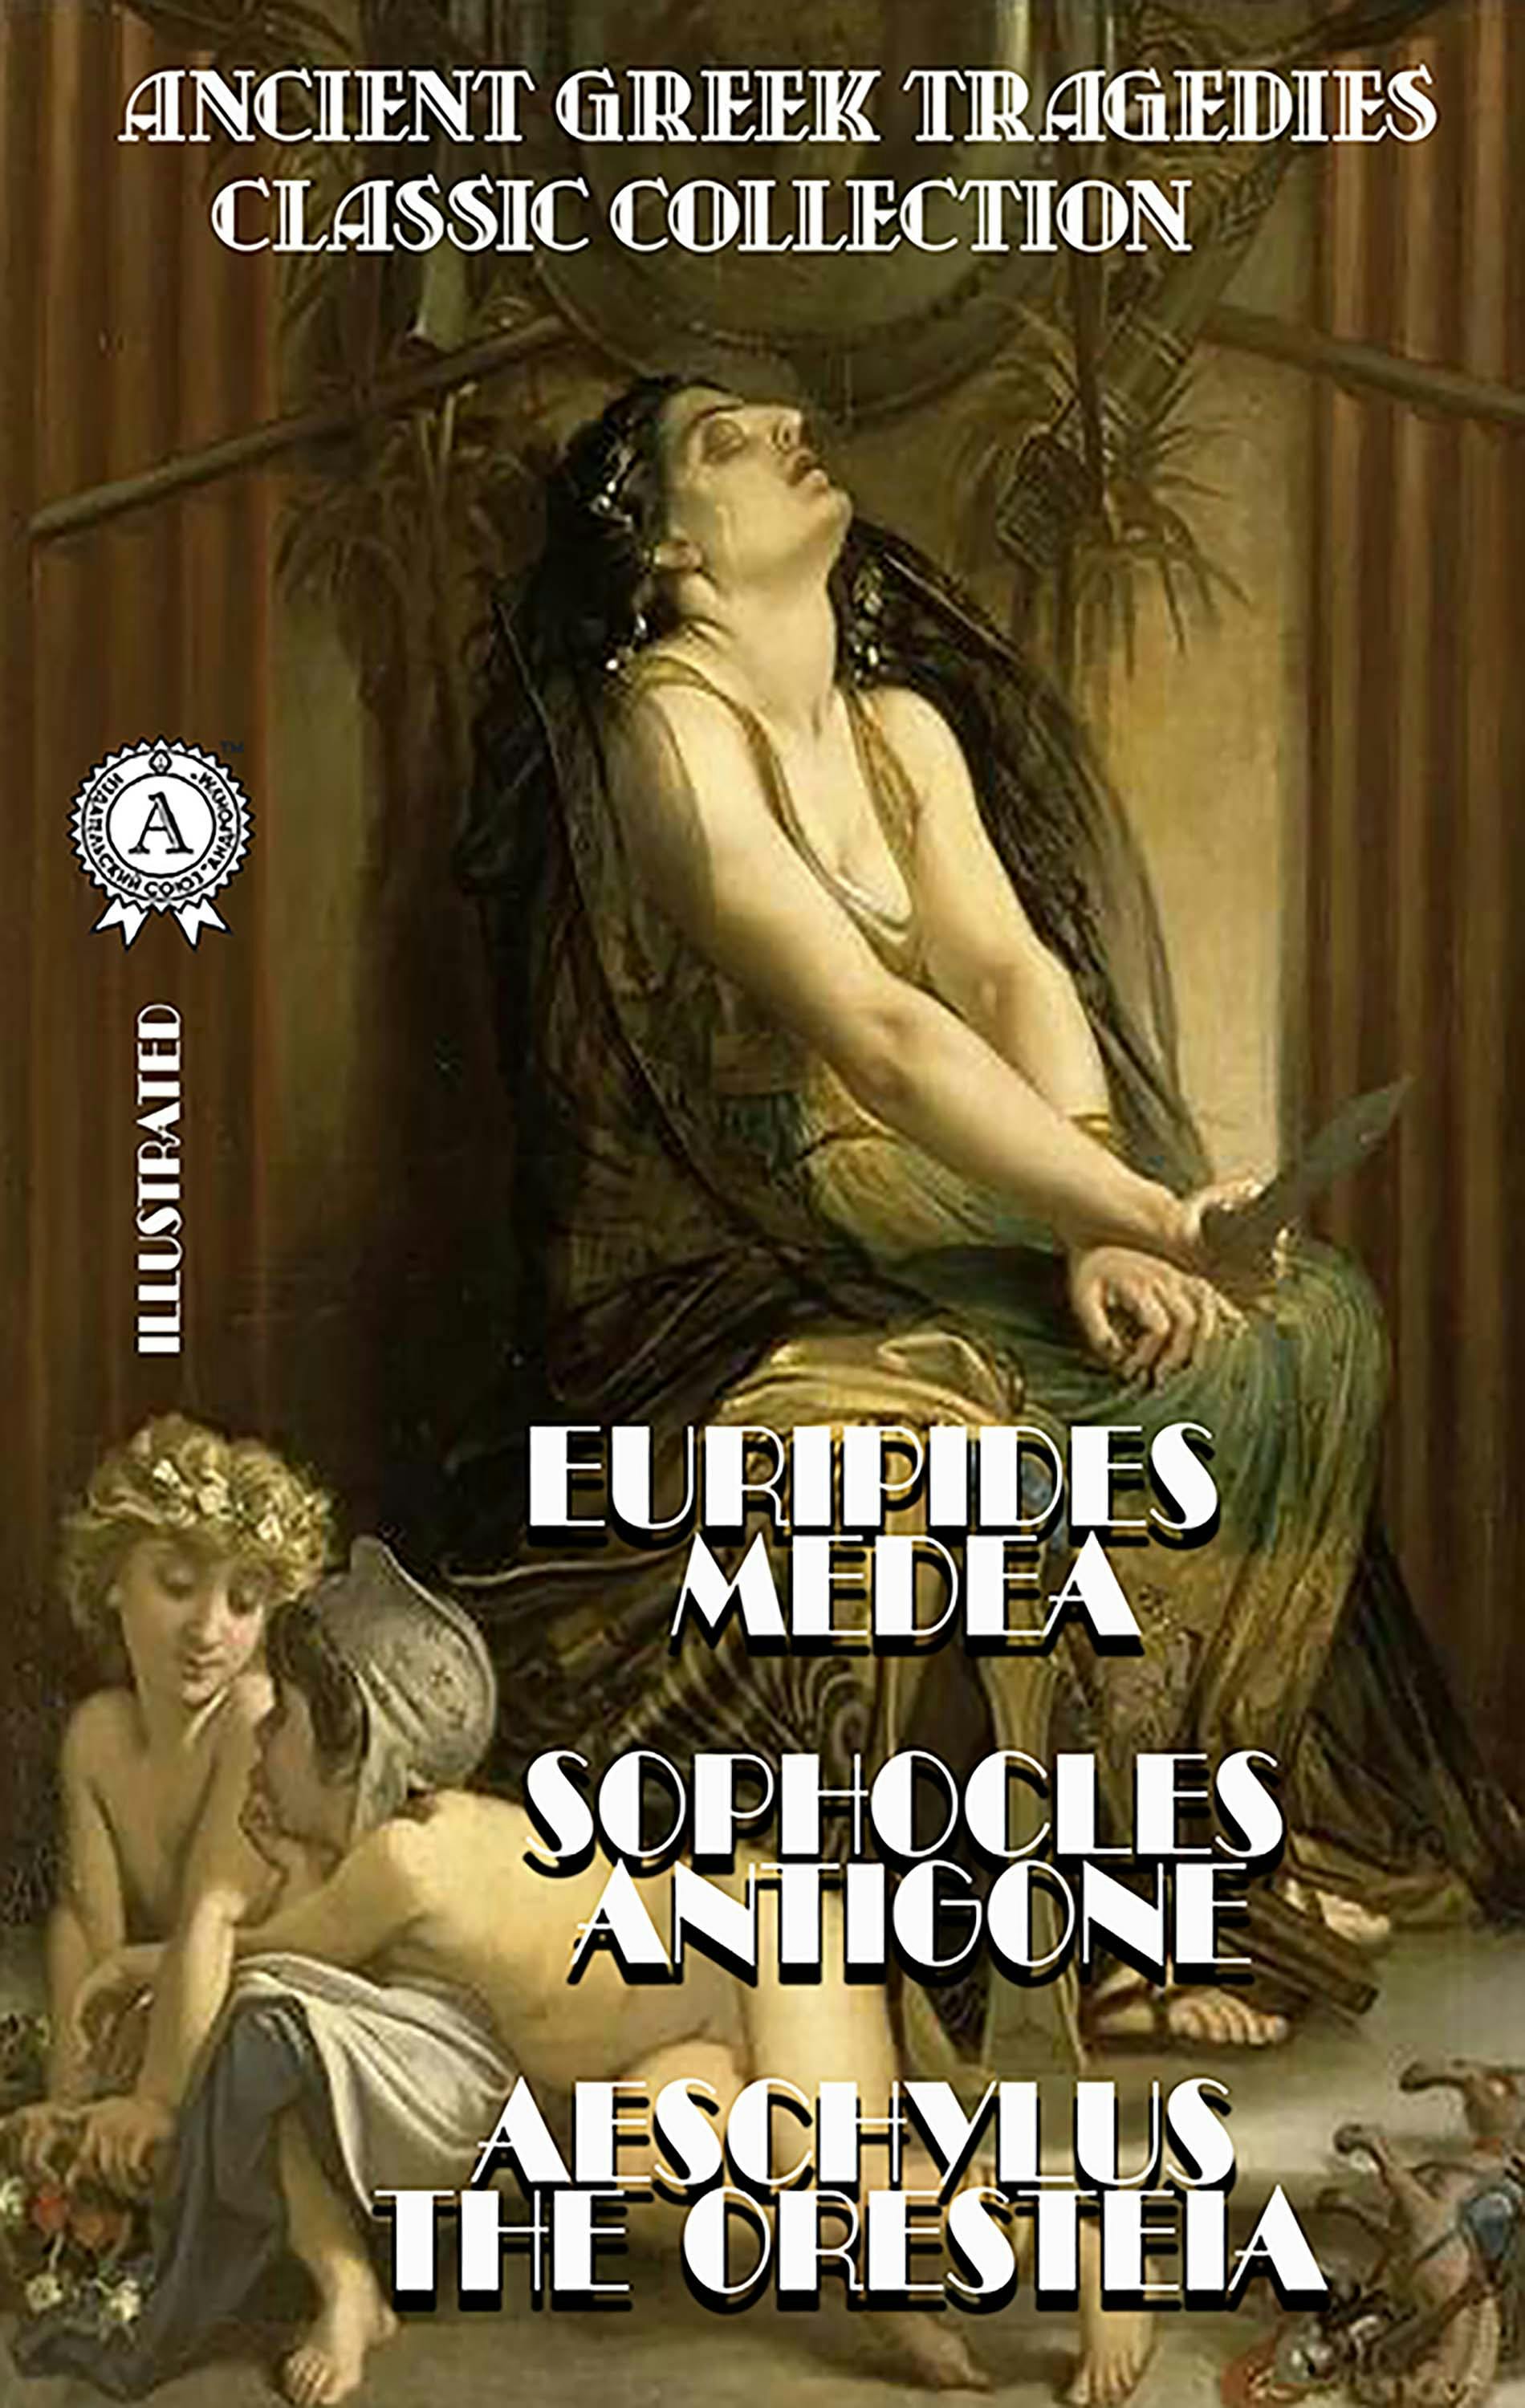 Ancient Greek Tragedies. Classic collection. Illustrated: Euripides. Medea; Sophocles. Antigone; Aeschylus. The Oresteia - undefined